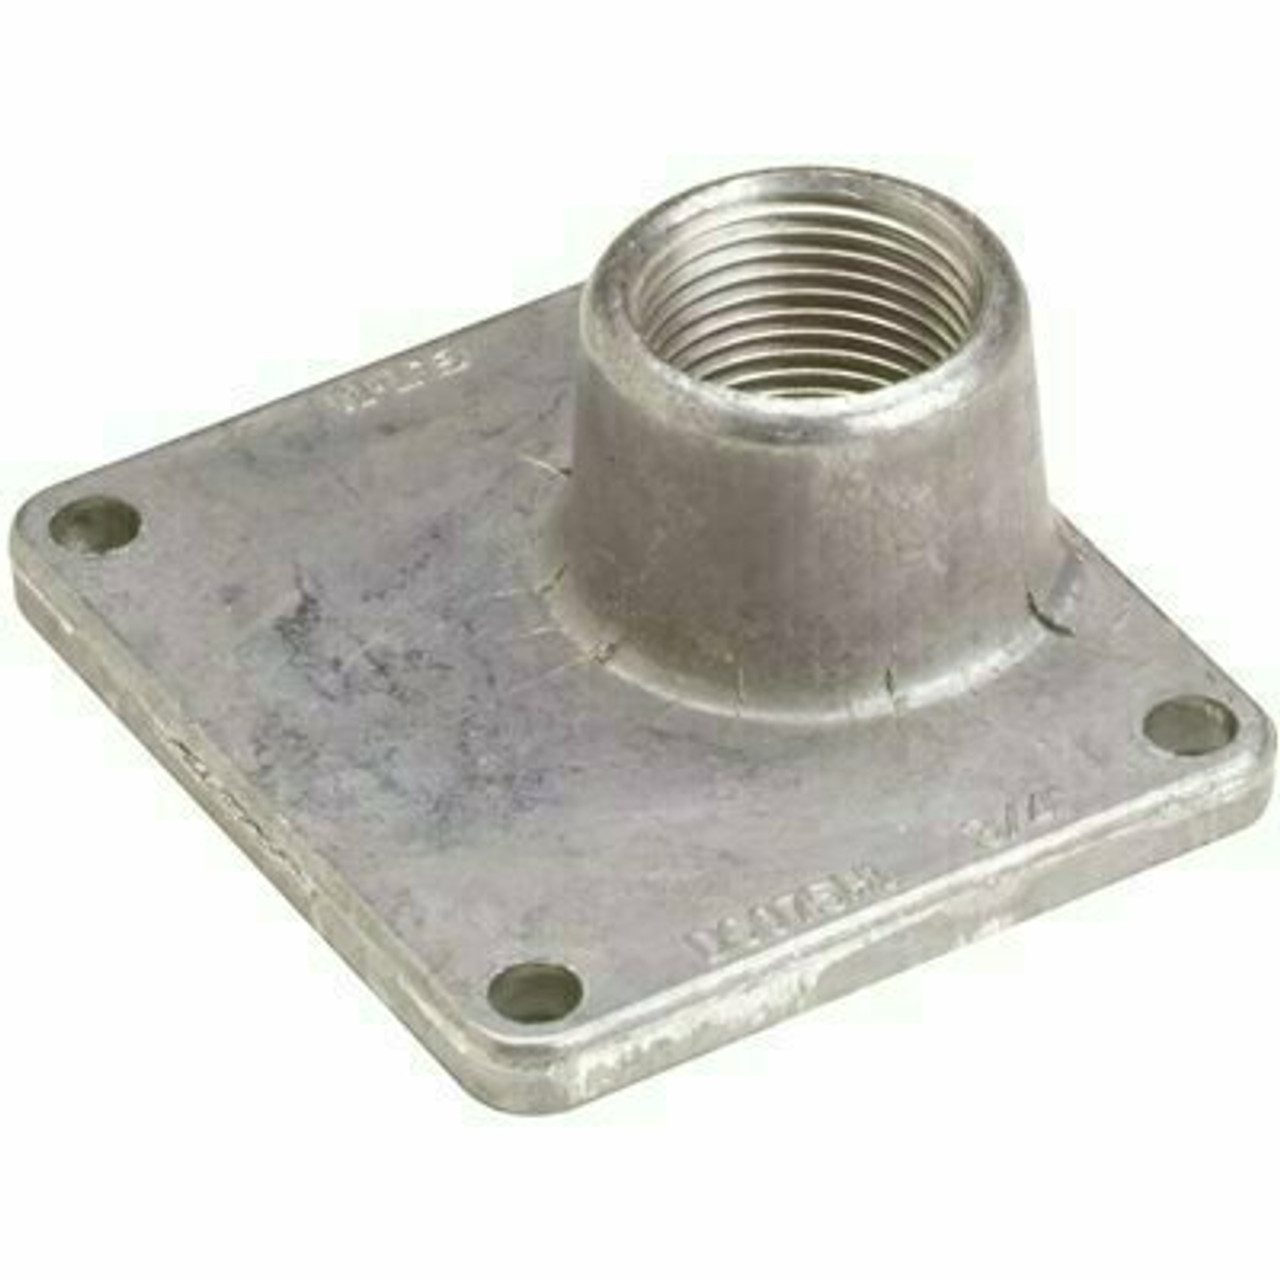 Eaton 3/4 In. Hub For Sub Panels